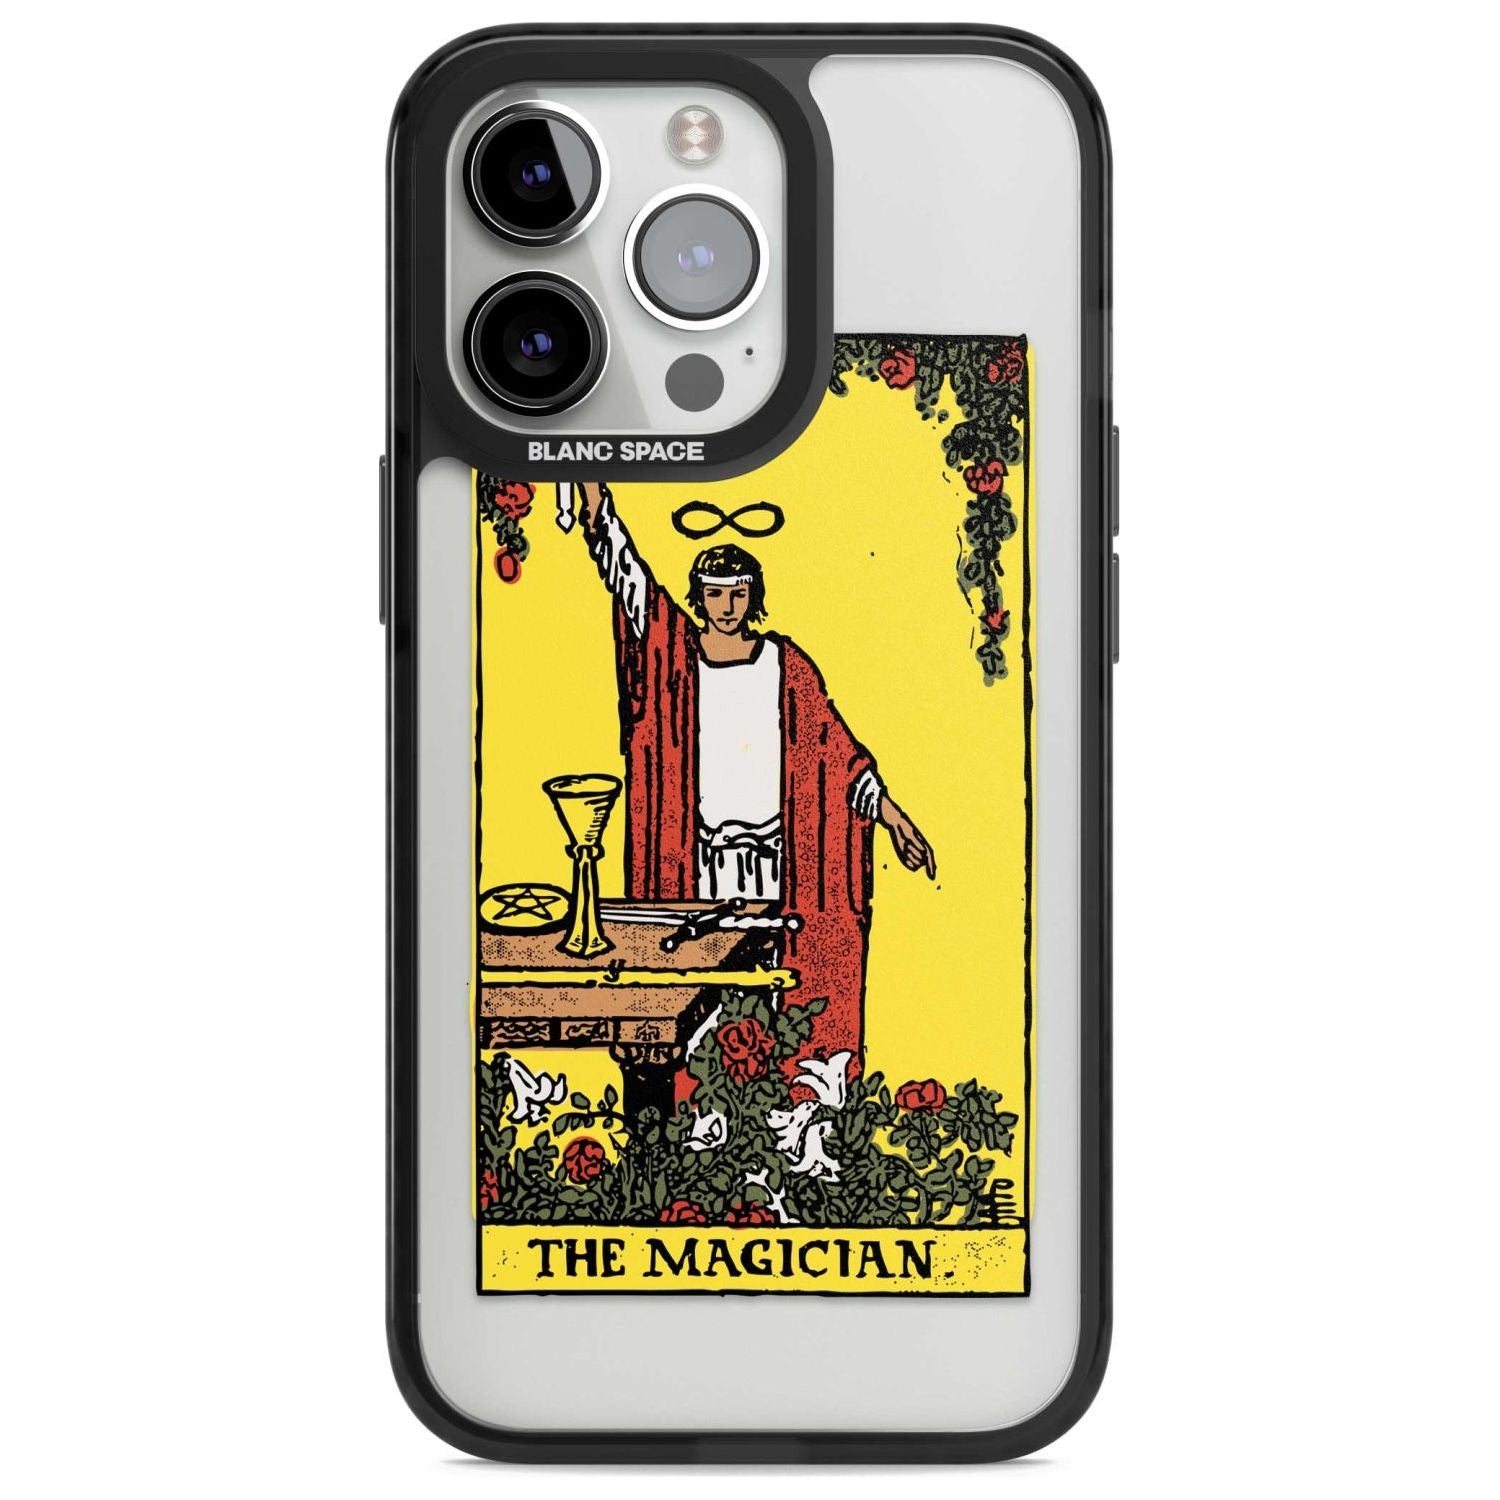 Personalised The Magician Tarot Card - Colour Phone Case iPhone 15 Pro Max / Magsafe Black Impact Case,iPhone 15 Pro / Magsafe Black Impact Case,iPhone 14 Pro Max / Magsafe Black Impact Case,iPhone 14 Pro / Magsafe Black Impact Case,iPhone 13 Pro / Magsafe Black Impact Case Blanc Space